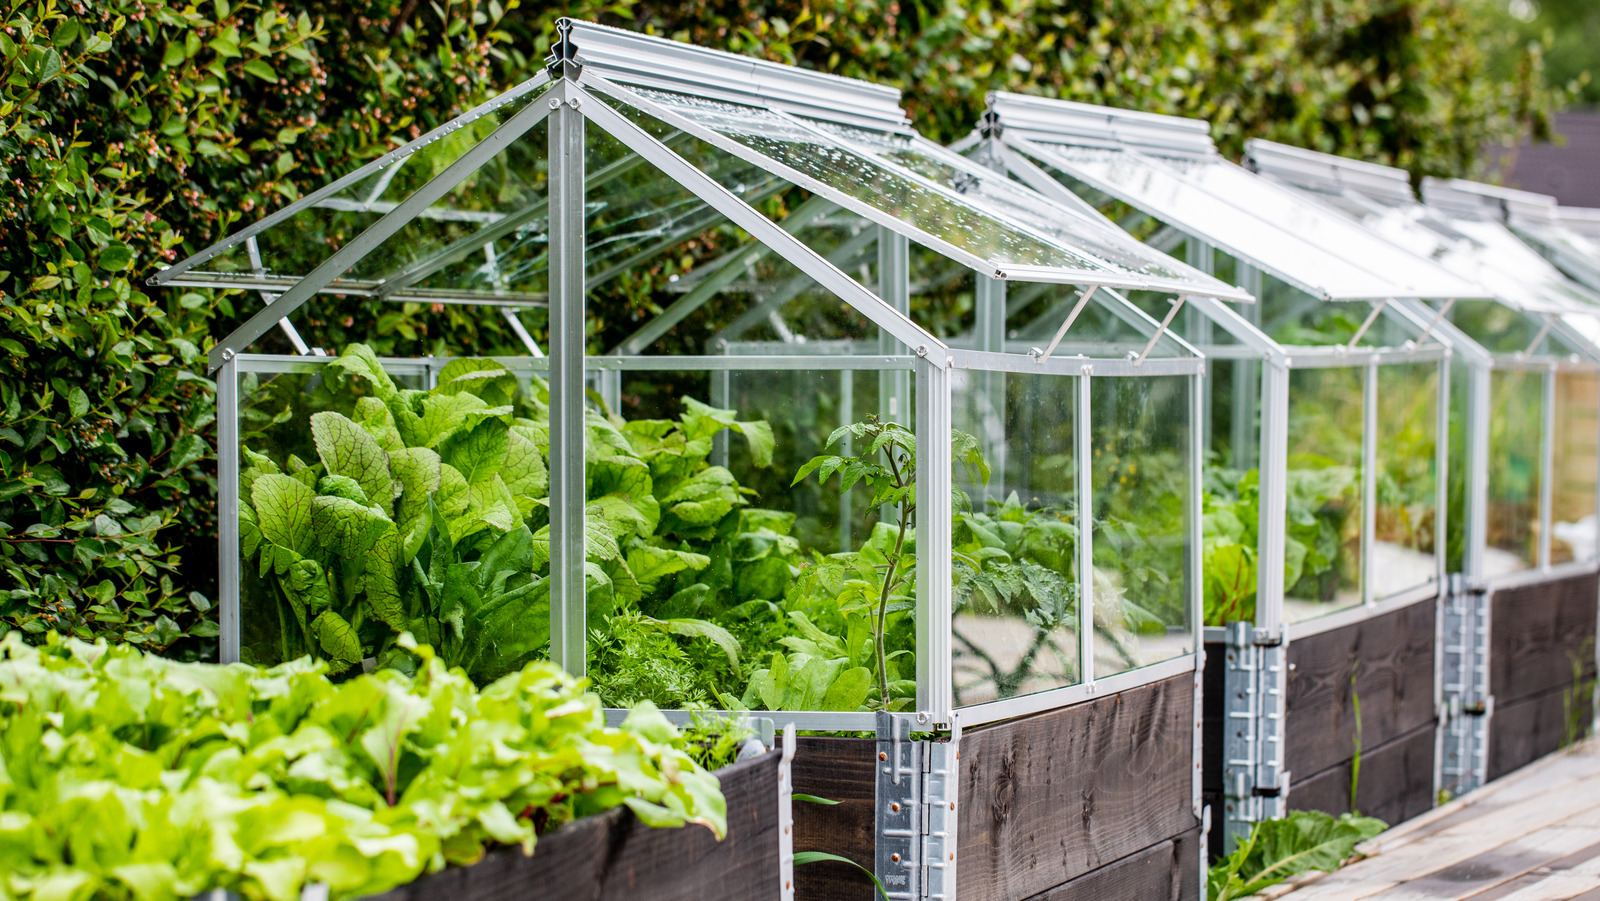 What Plants Can Grow In A Greenhouse